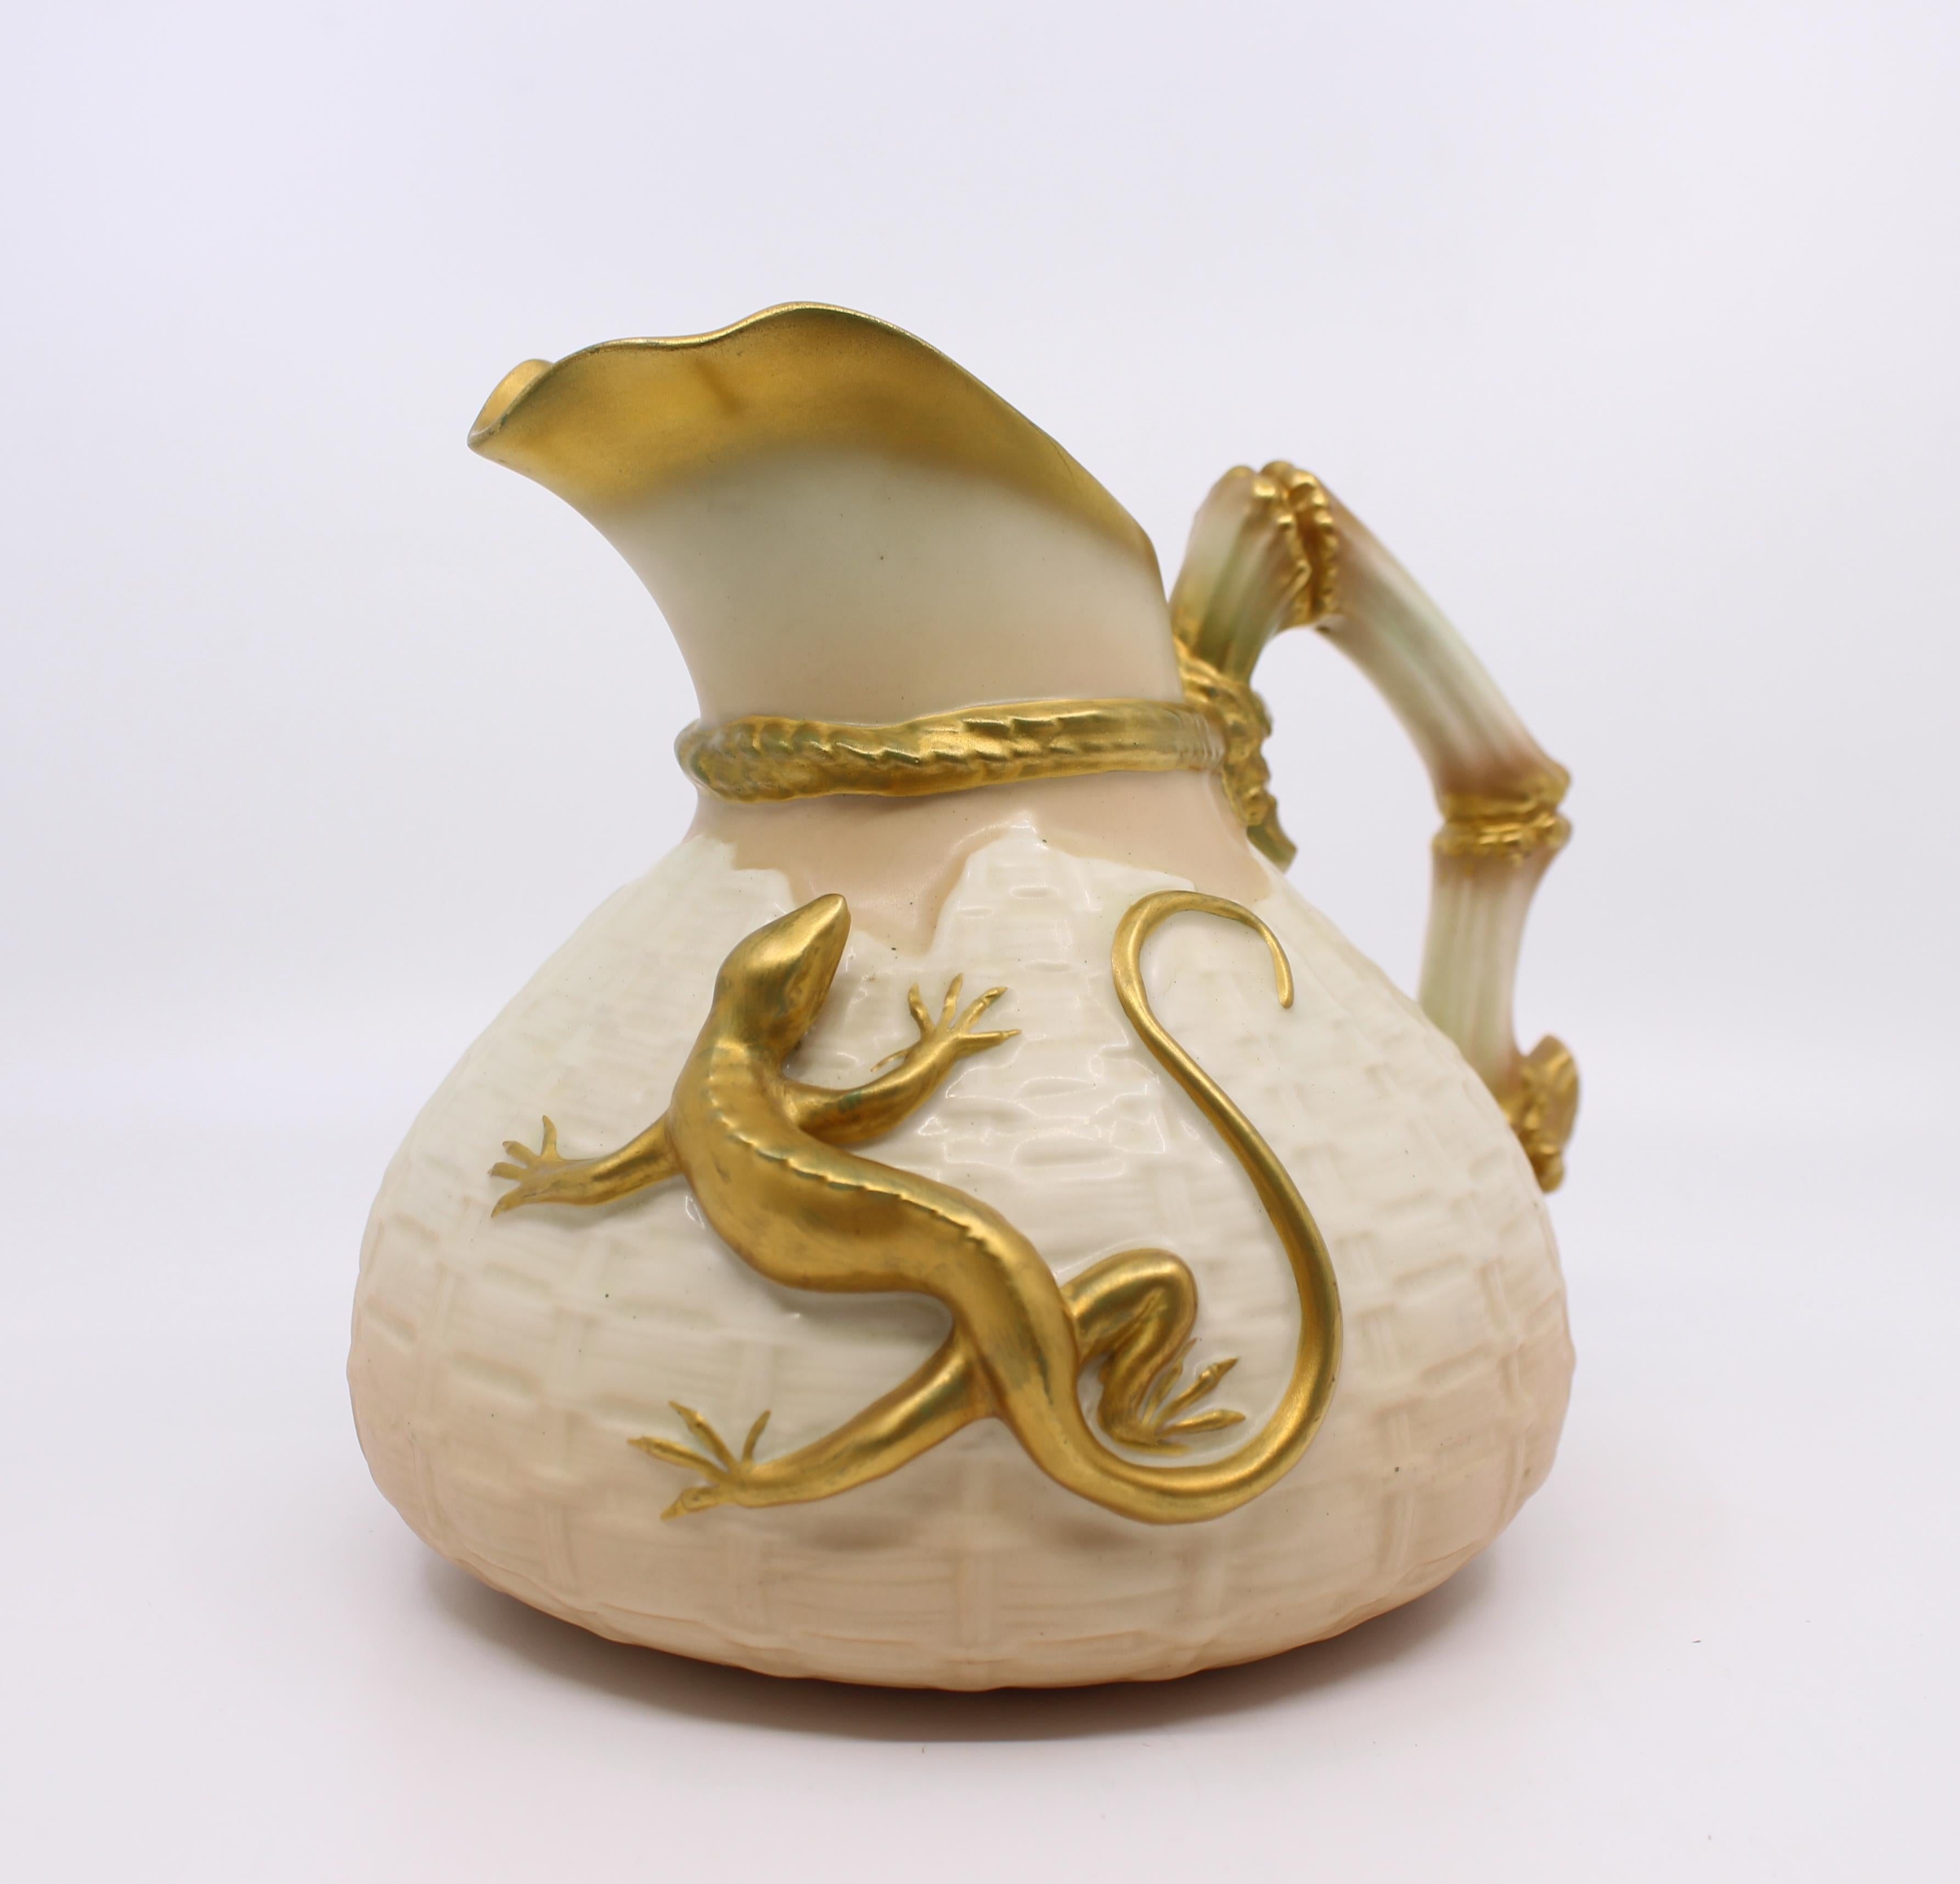 Royal Worcester blush pattern 1714 Lizard jug 1930


Royal Worcester, Made in England

Date 1930

Measures: Width: 17 cm / 6 3/4 in

Depth: 15 cm / 6 in

Height: 15 cm / 6 in

Royal Worcester puce backstamp with date code

Very good